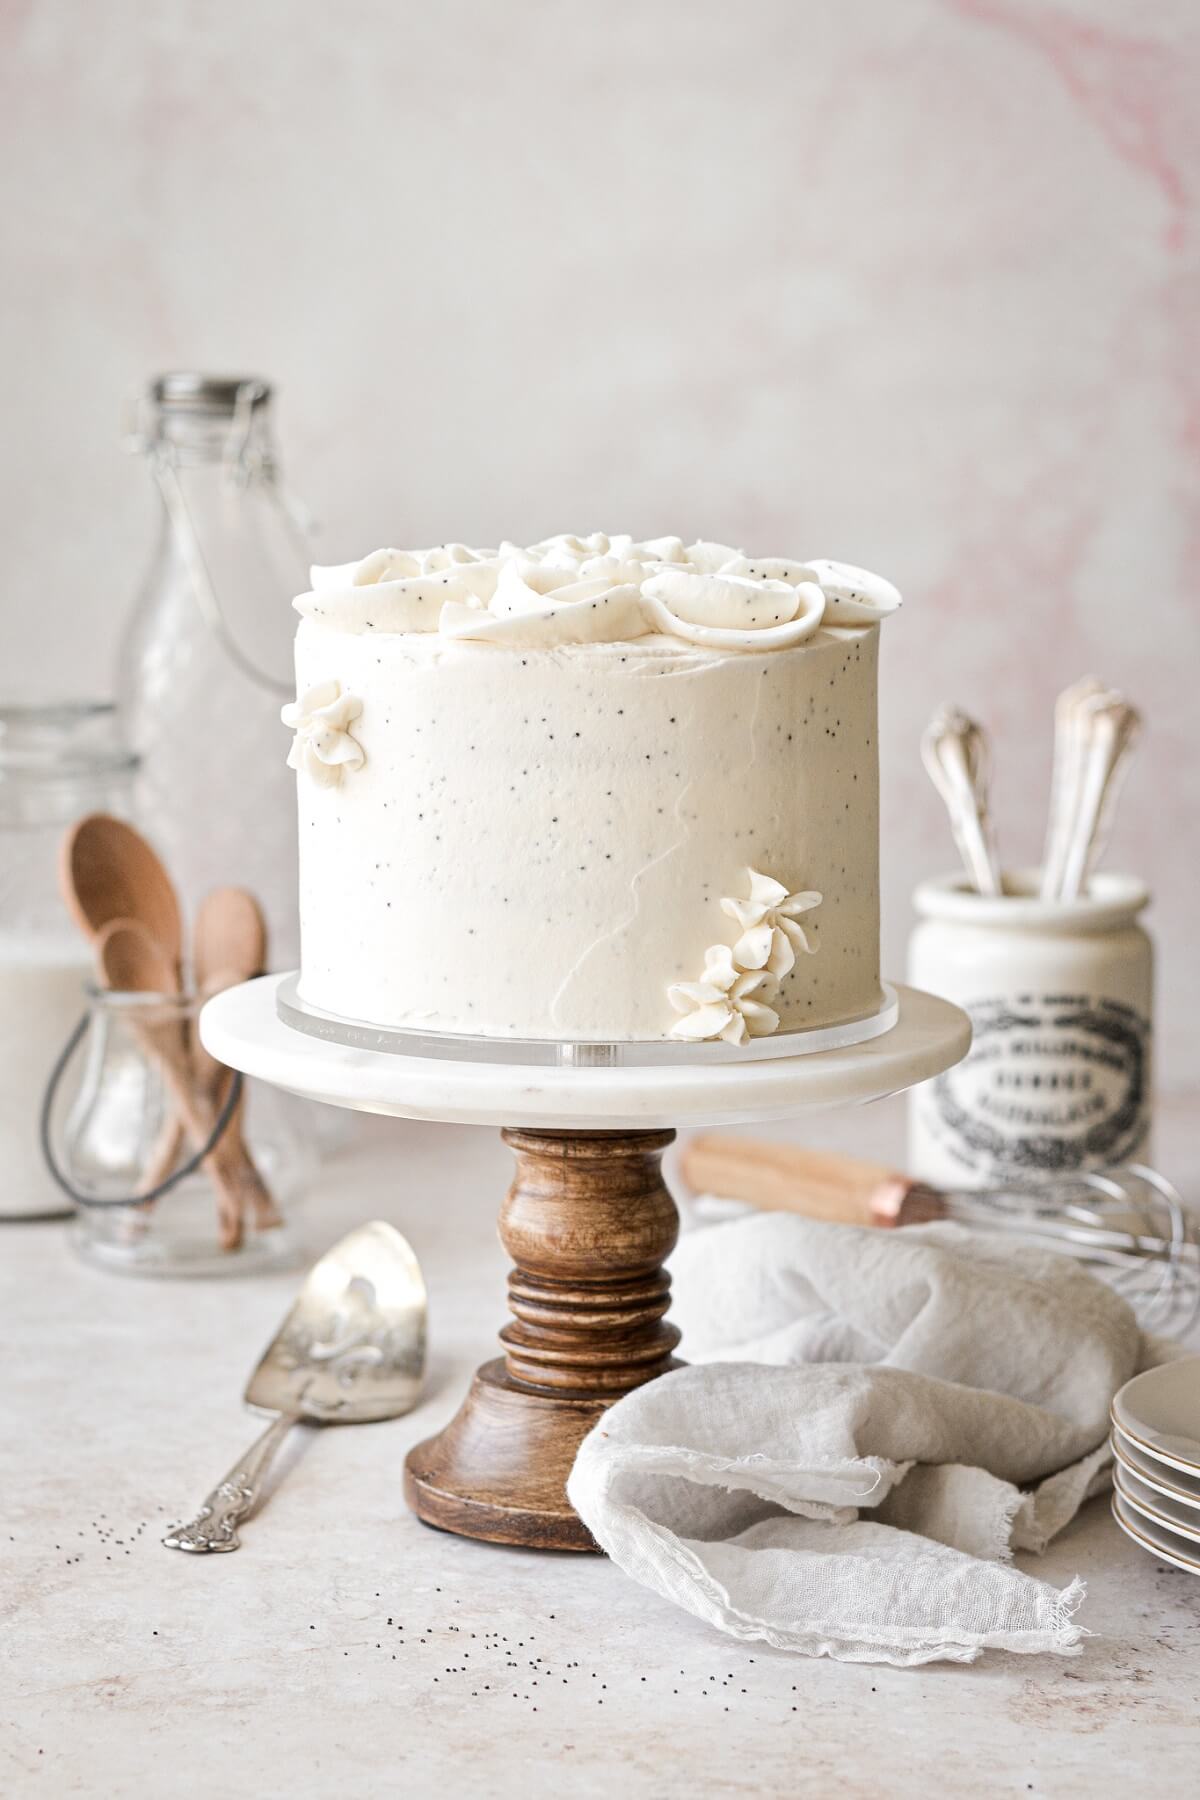 Almond poppy seed cake on a wood and marble cake stand.